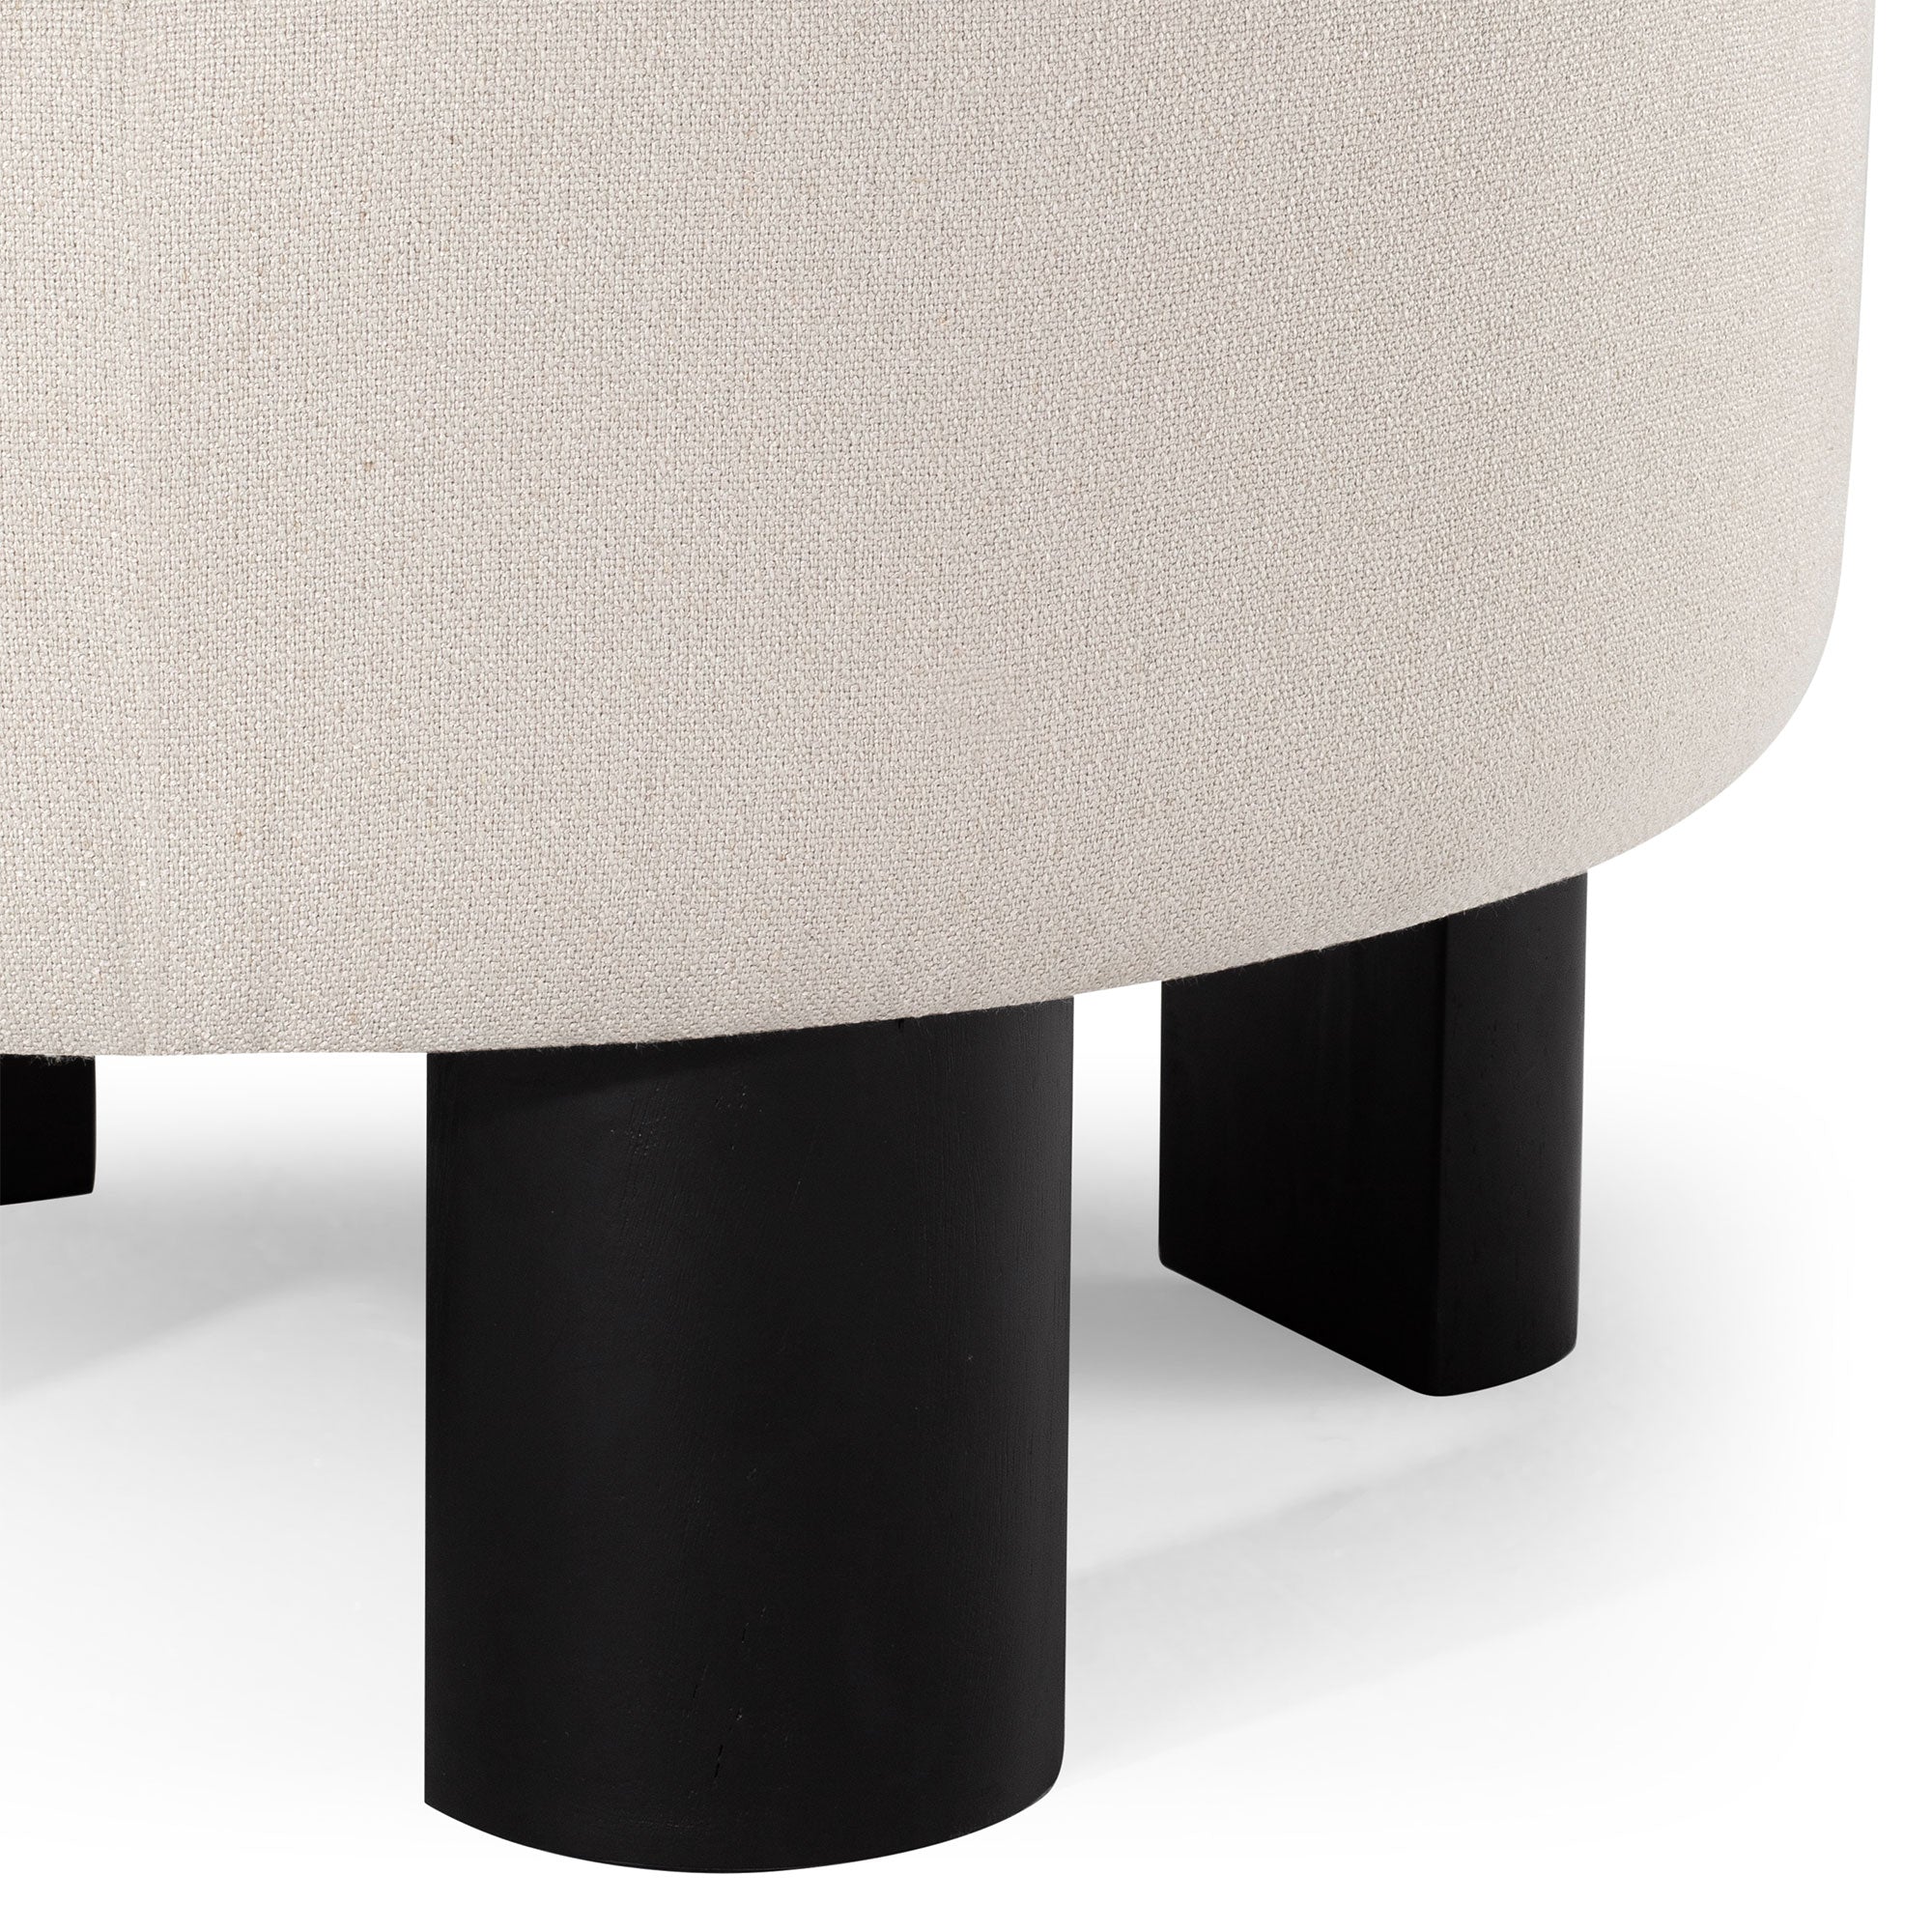 Celia Contemporary Upholstered Ottoman with Refined Black Wood Finish in Ottomans & Benches by Maven Lane